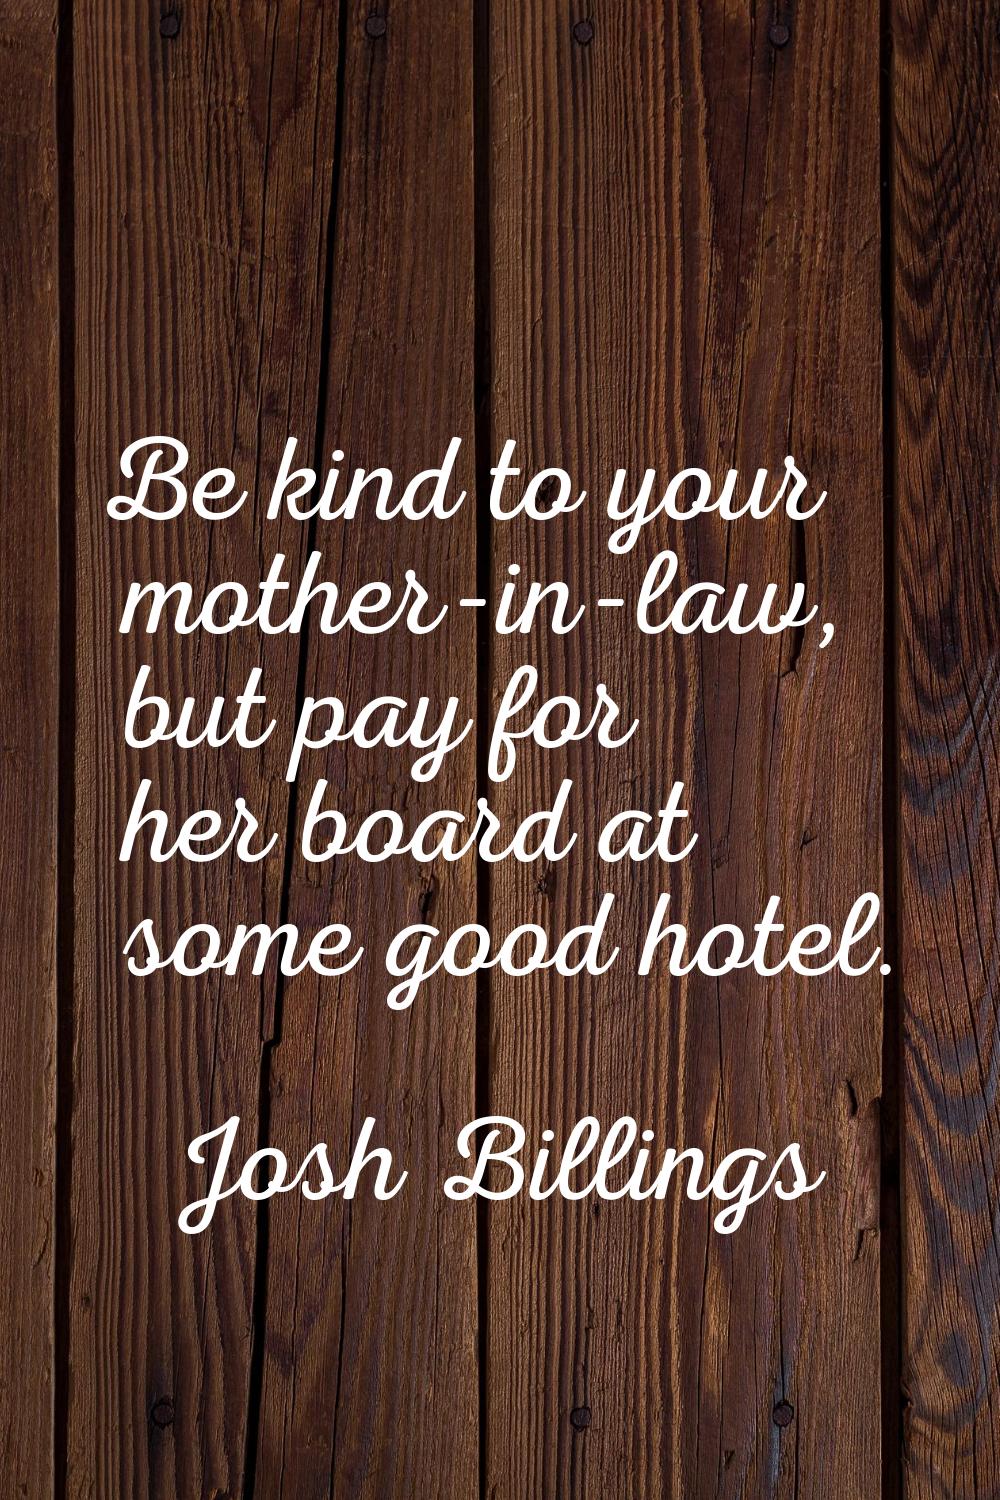 Be kind to your mother-in-law, but pay for her board at some good hotel.